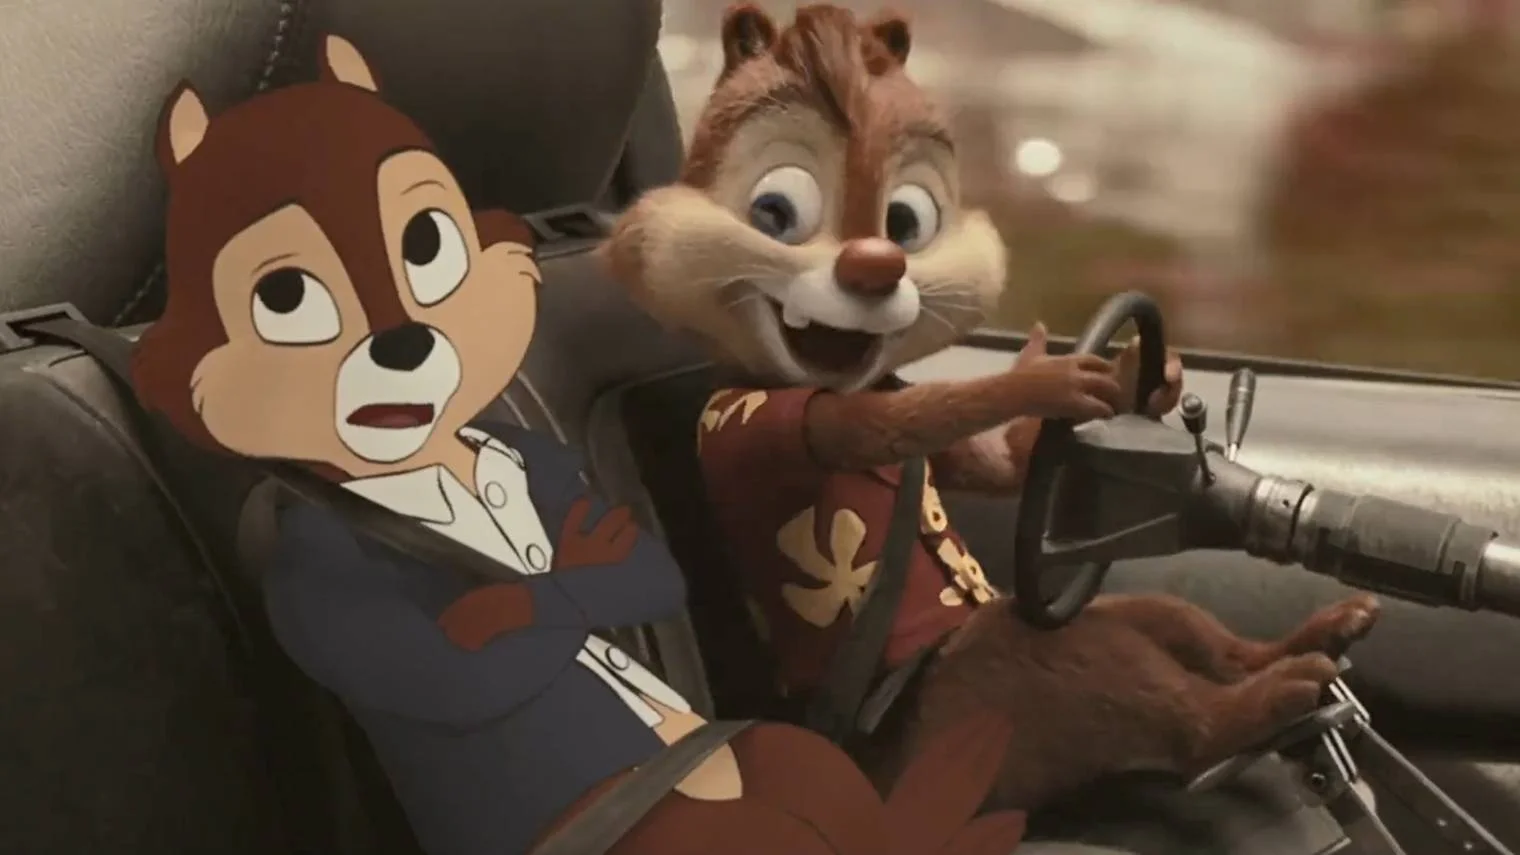 disneys-animation-chip-n-dale-rescue-rangers-releases-teaser-trailer-and-poster-it-will-be-launched-on-disney-on-520-1